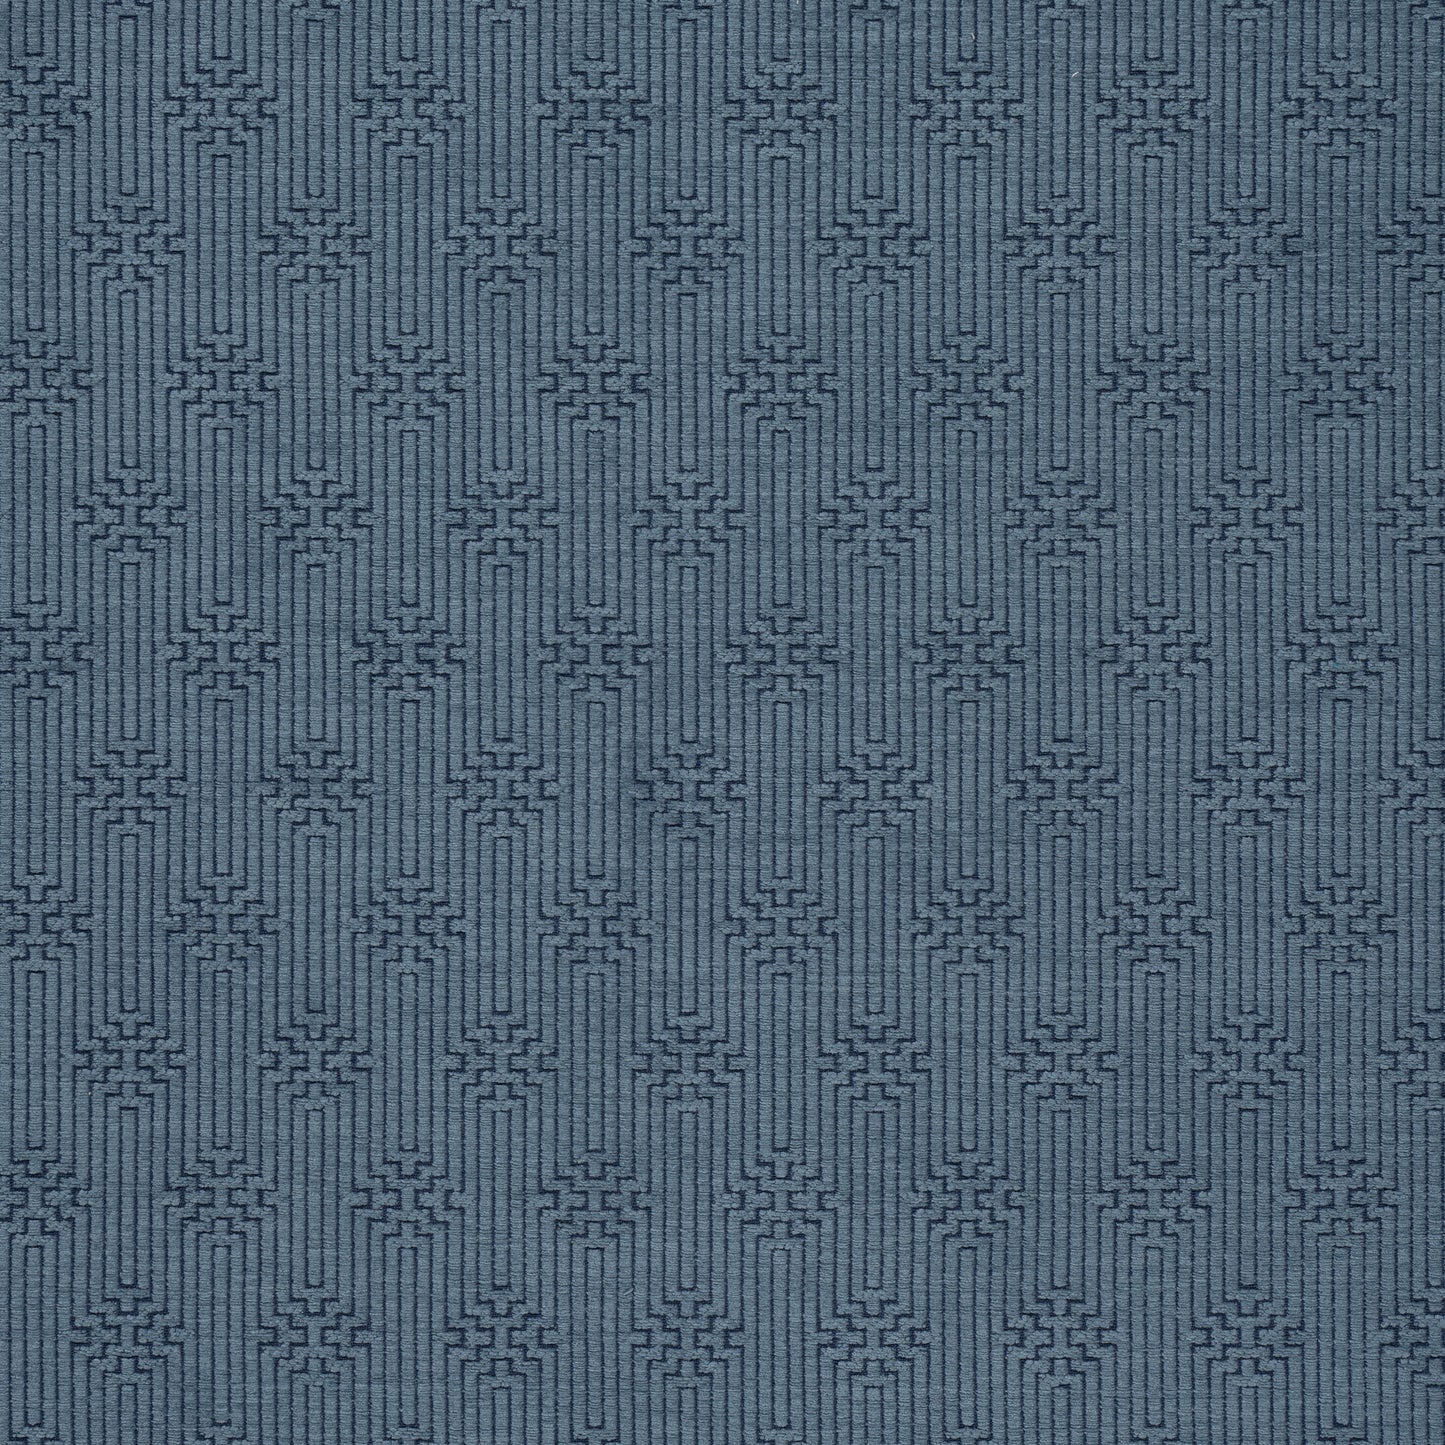 Purchase Thibaut Fabric Pattern# W74210 pattern name Crete color Blue